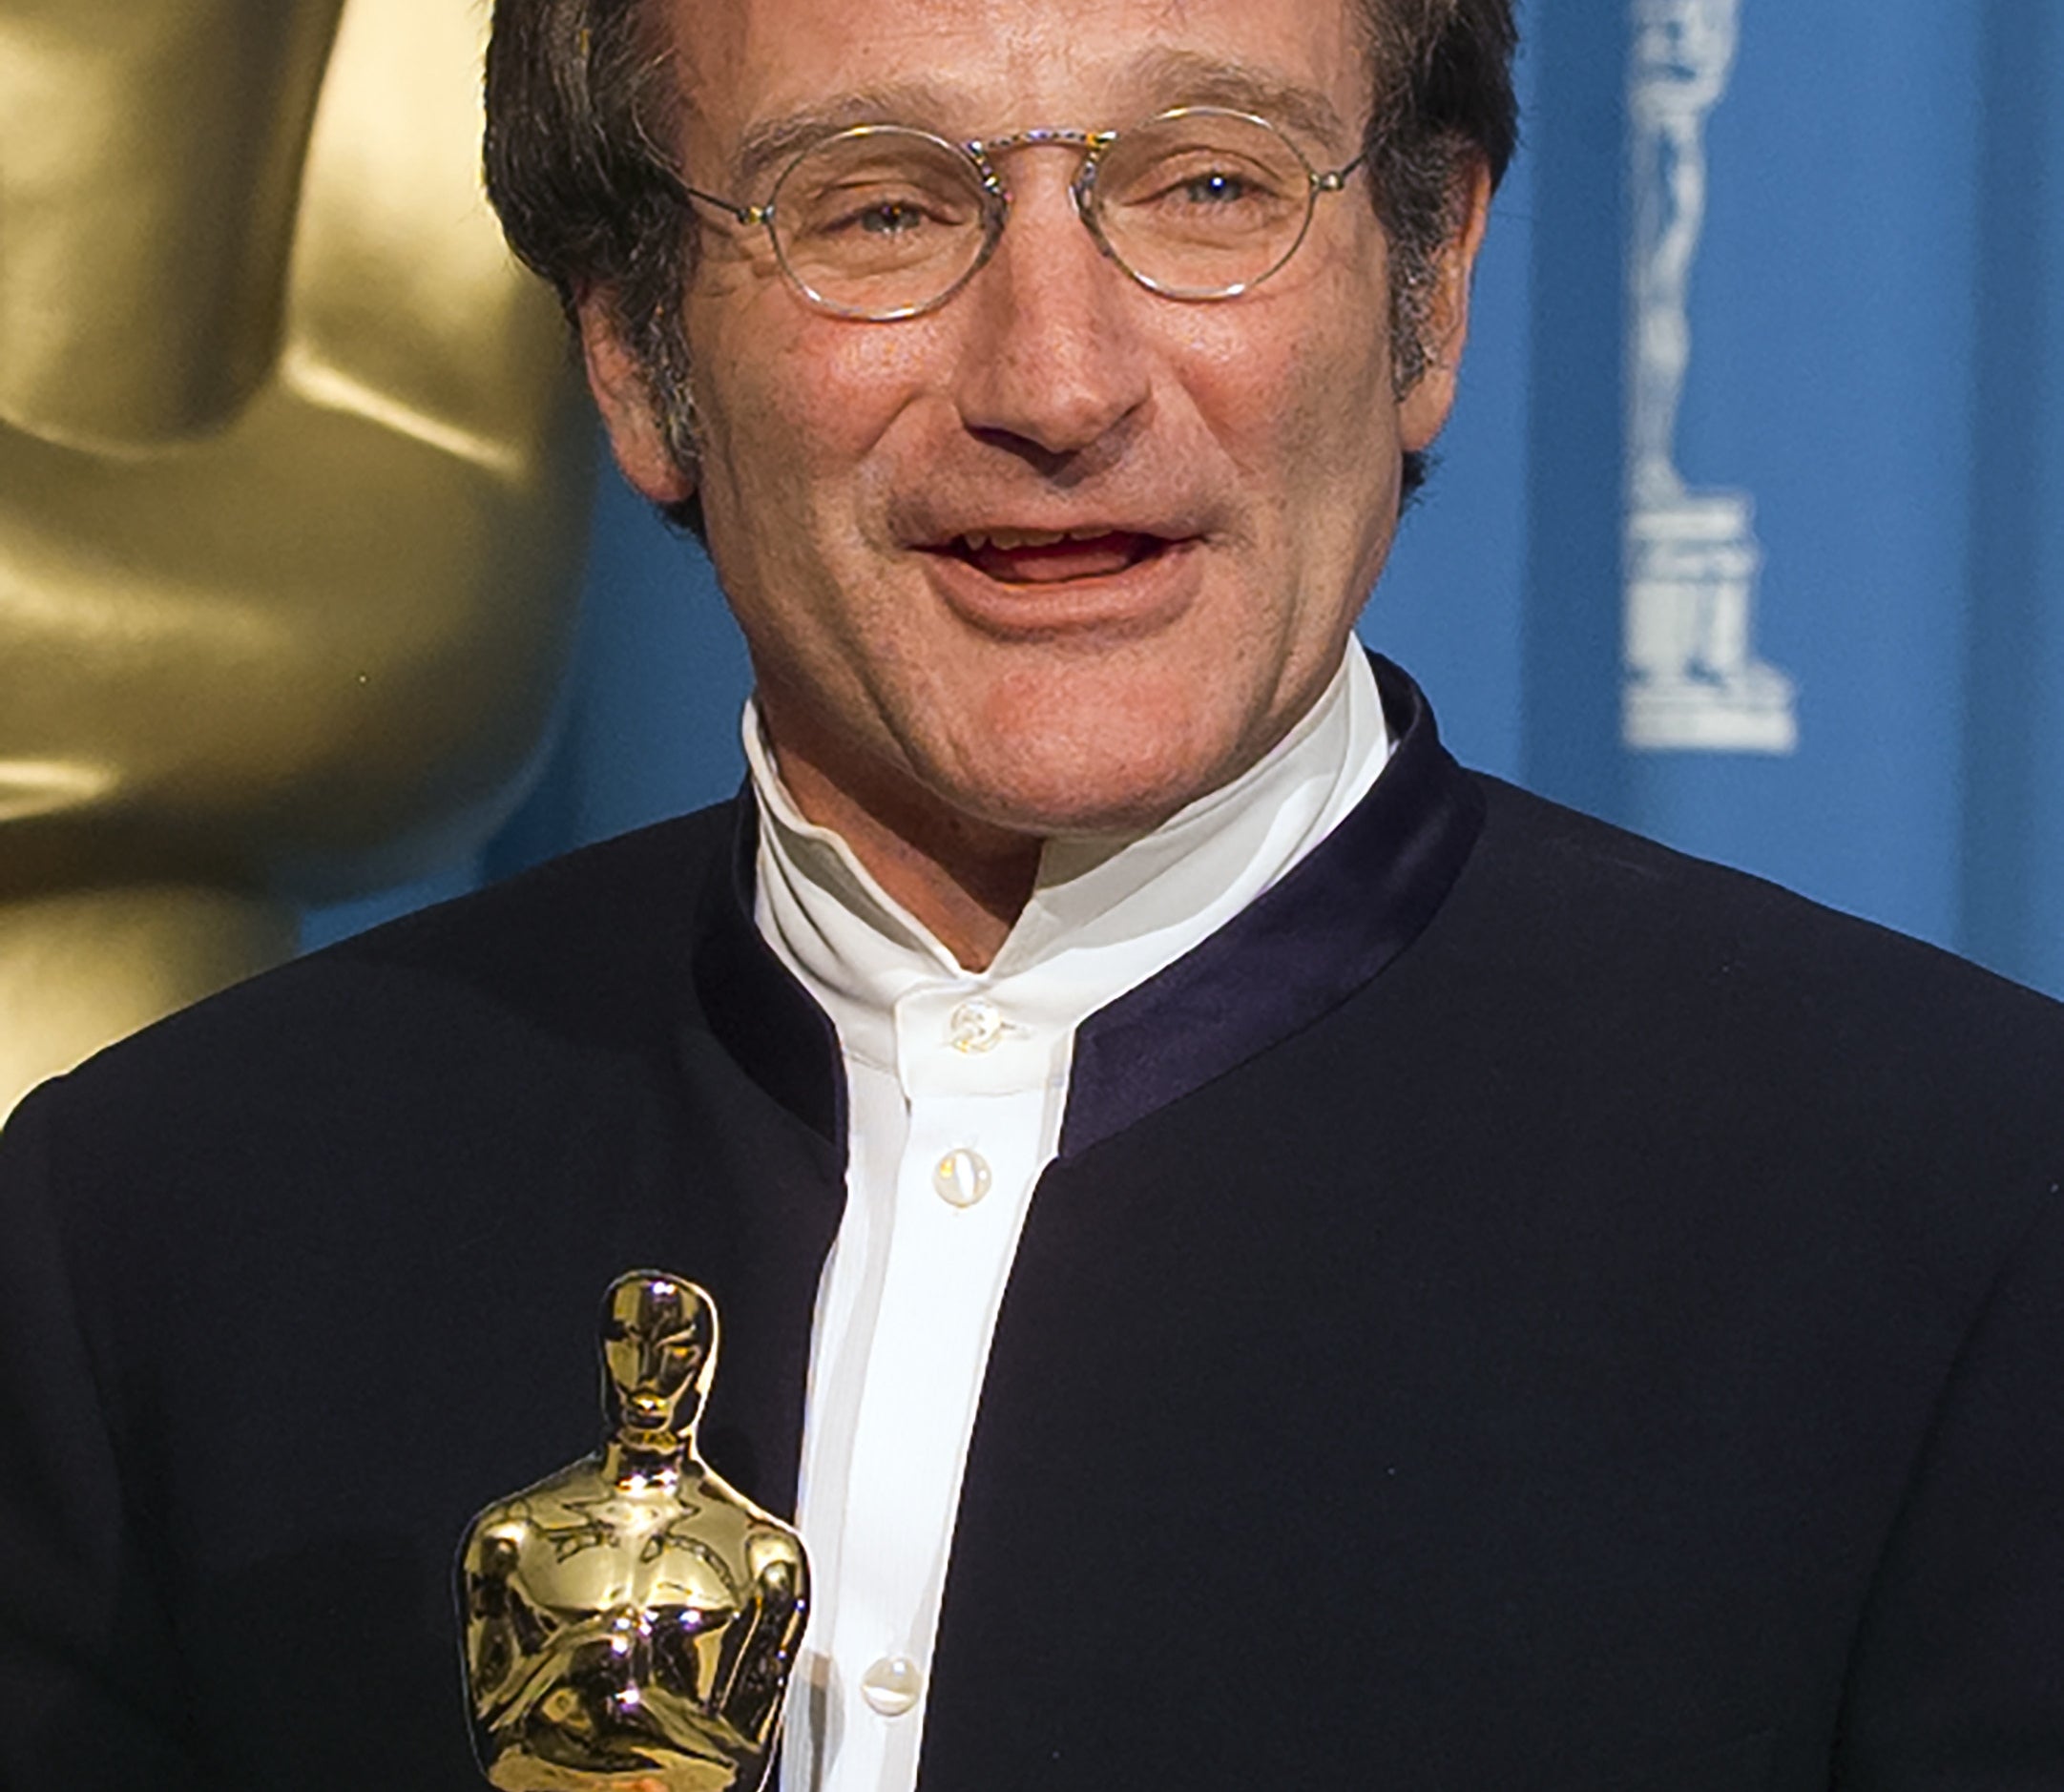 A bespectacled Robin Williams at an awards show